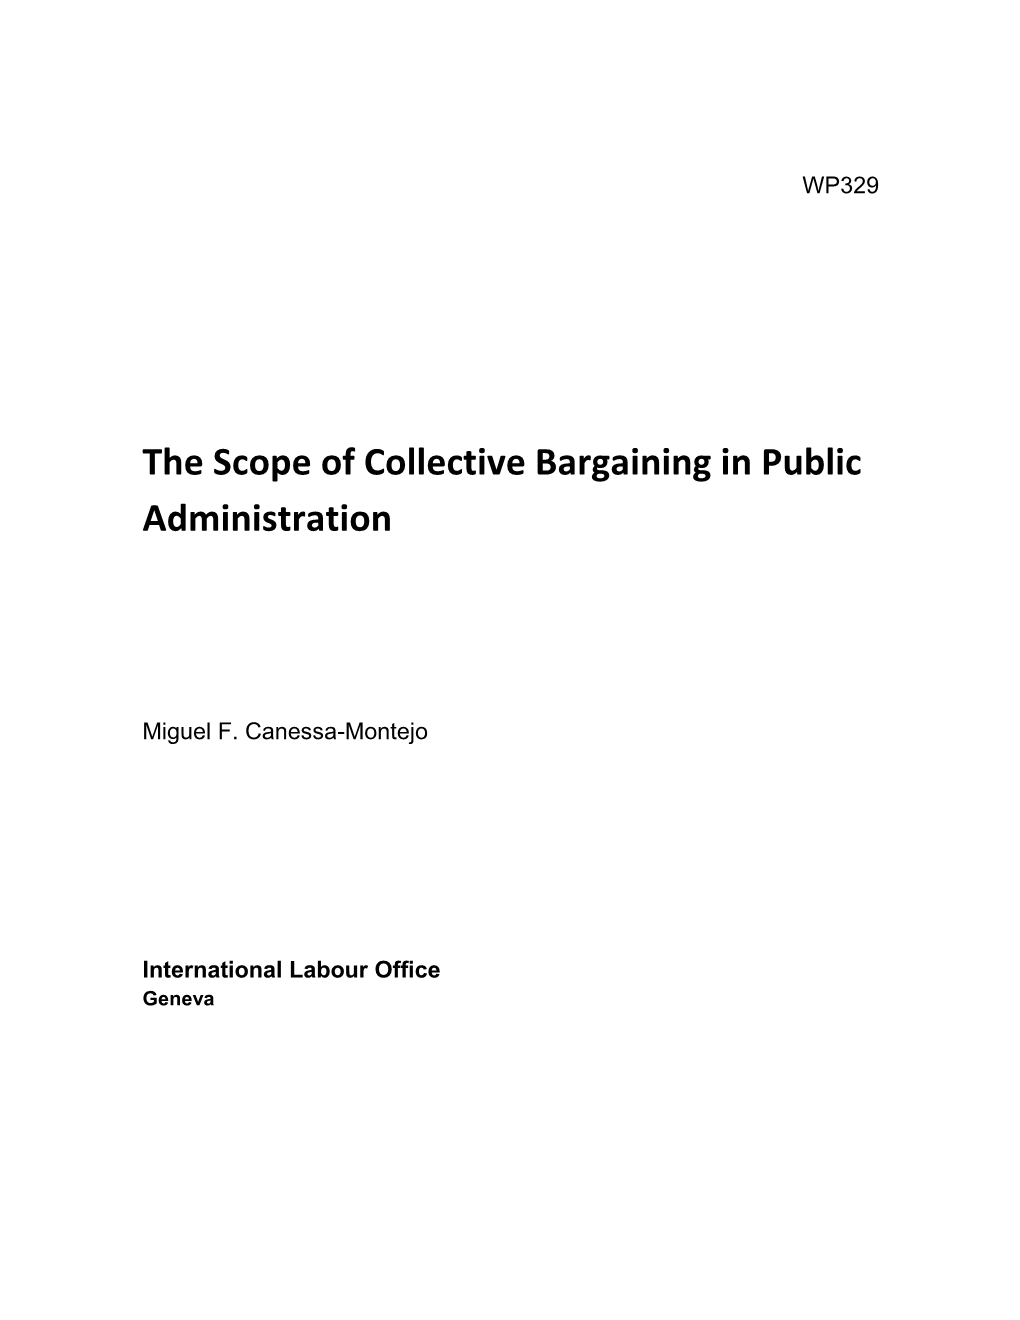 The Scope of Collective Bargaining in Public Administration